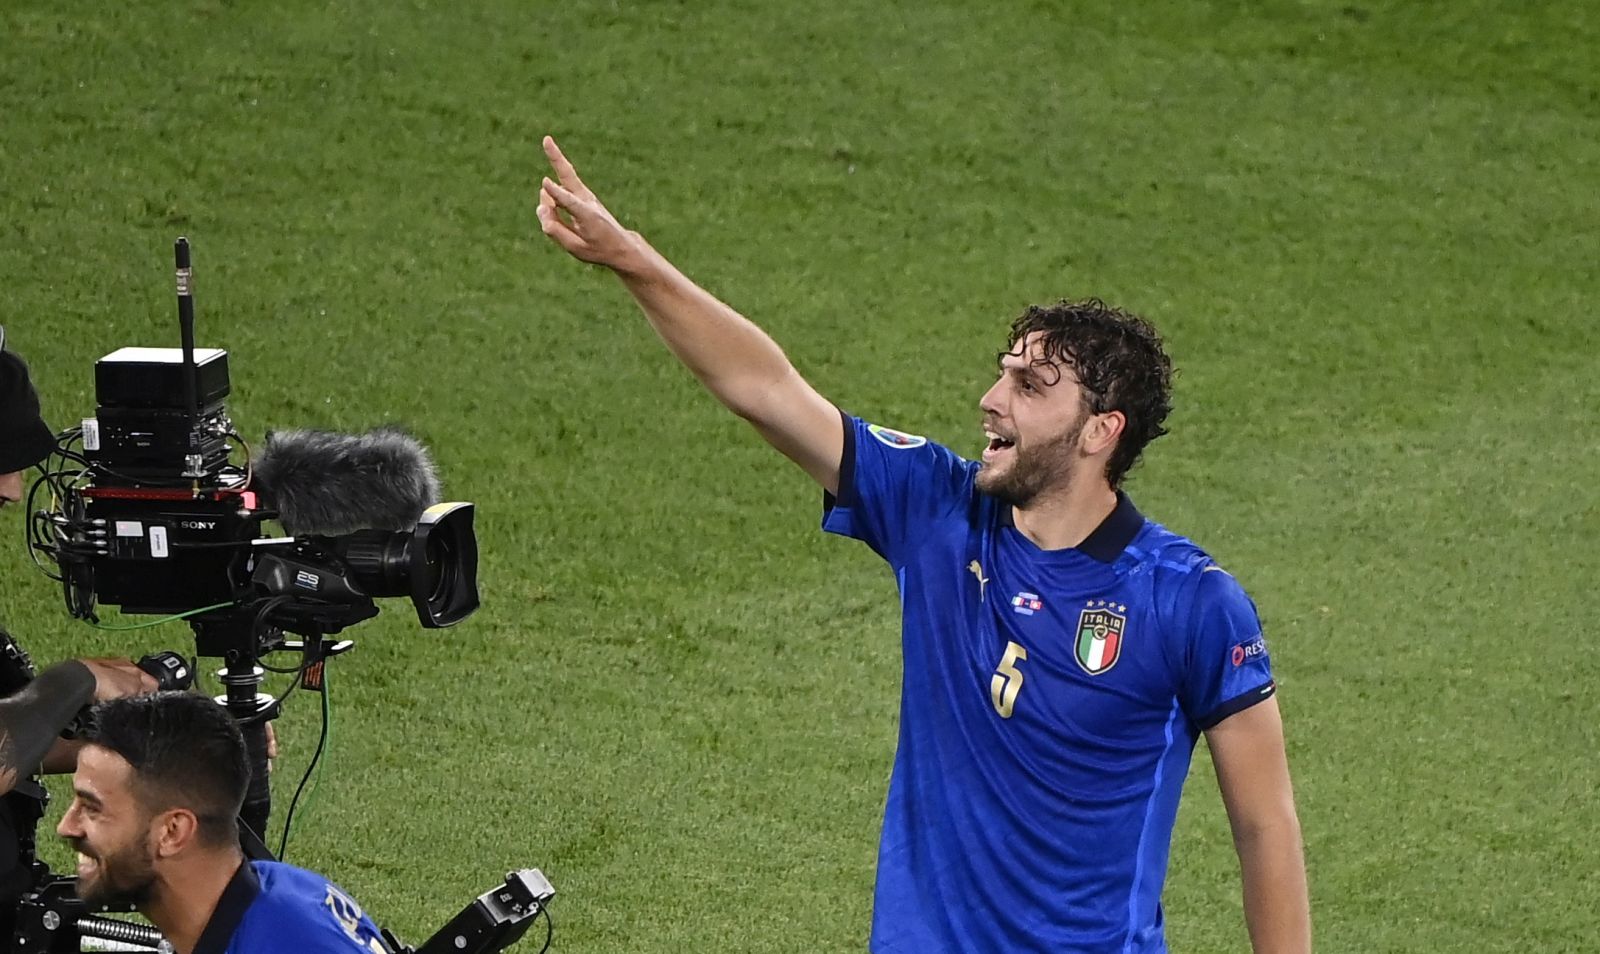 epa09277902 Manuel Locatelli of Italy celebrates after scoring the 1-0 goal during the UEFA EURO 2020 group A preliminary round soccer match between Italy and Switzerland in Rome, Italy, 16 June 2021.  EPA/Riccardo Antimiani / POOL (RESTRICTIONS: For editorial news reporting purposes only. Images must appear as still images and must not emulate match action video footage. Photographs published in online publications shall have an interval of at least 20 seconds between the posting.)